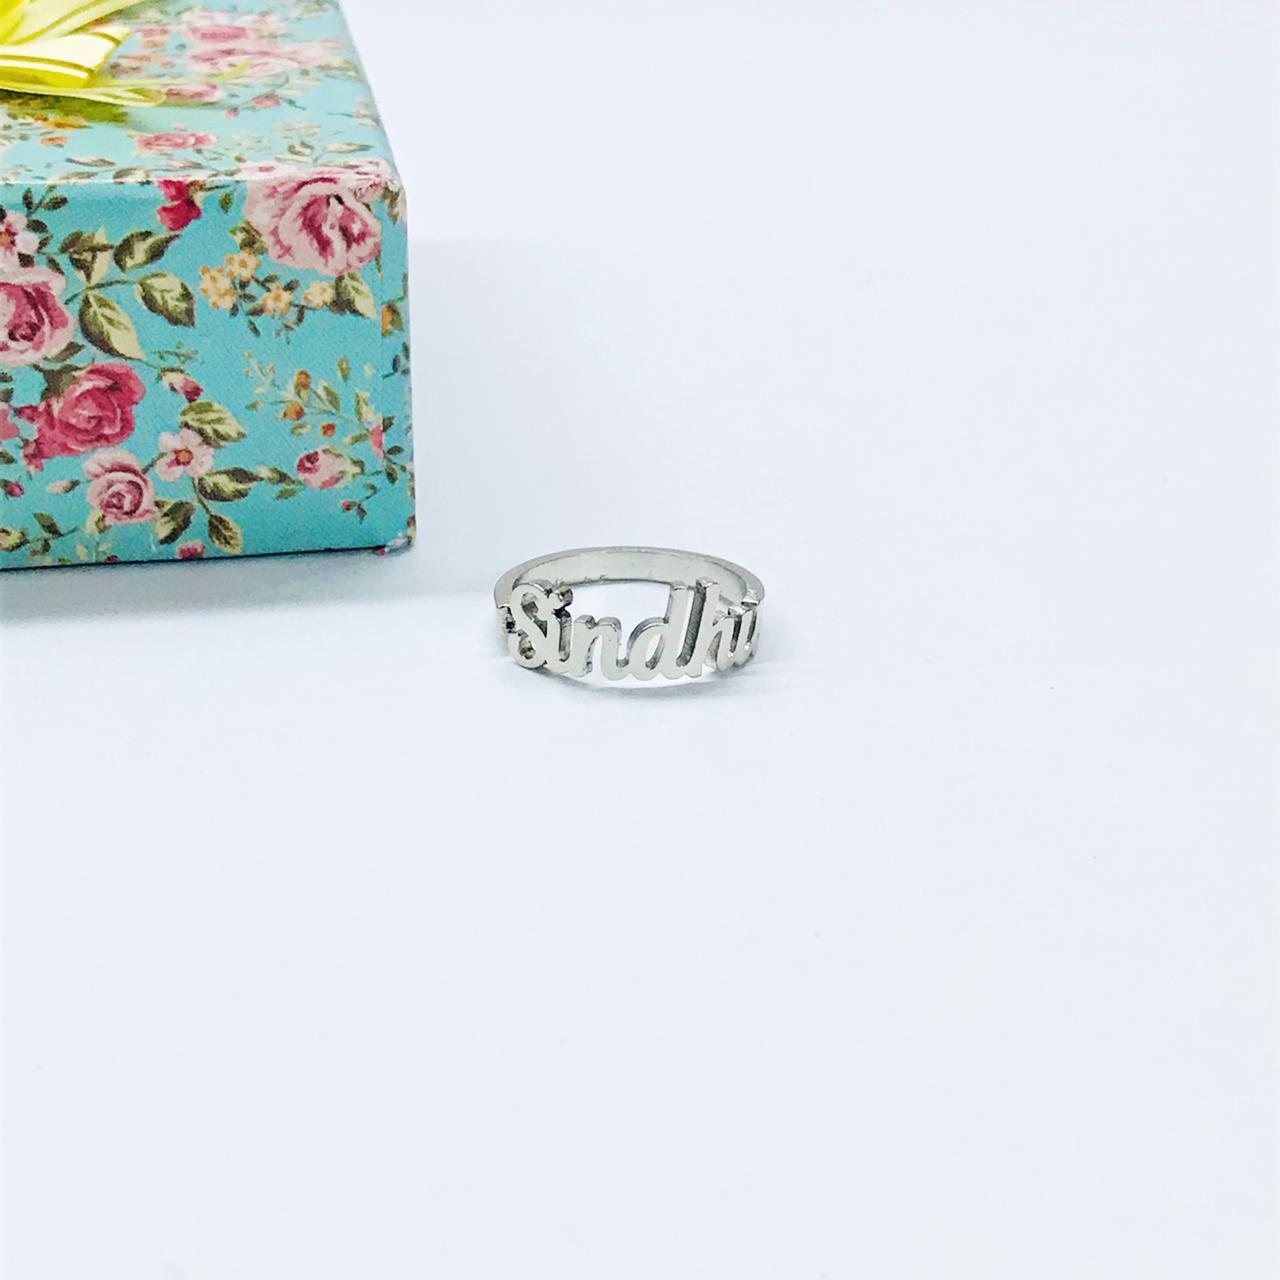 Customized gift] Customized platinum wedding rings - Shop ciaojewelry  General Rings - Pinkoi